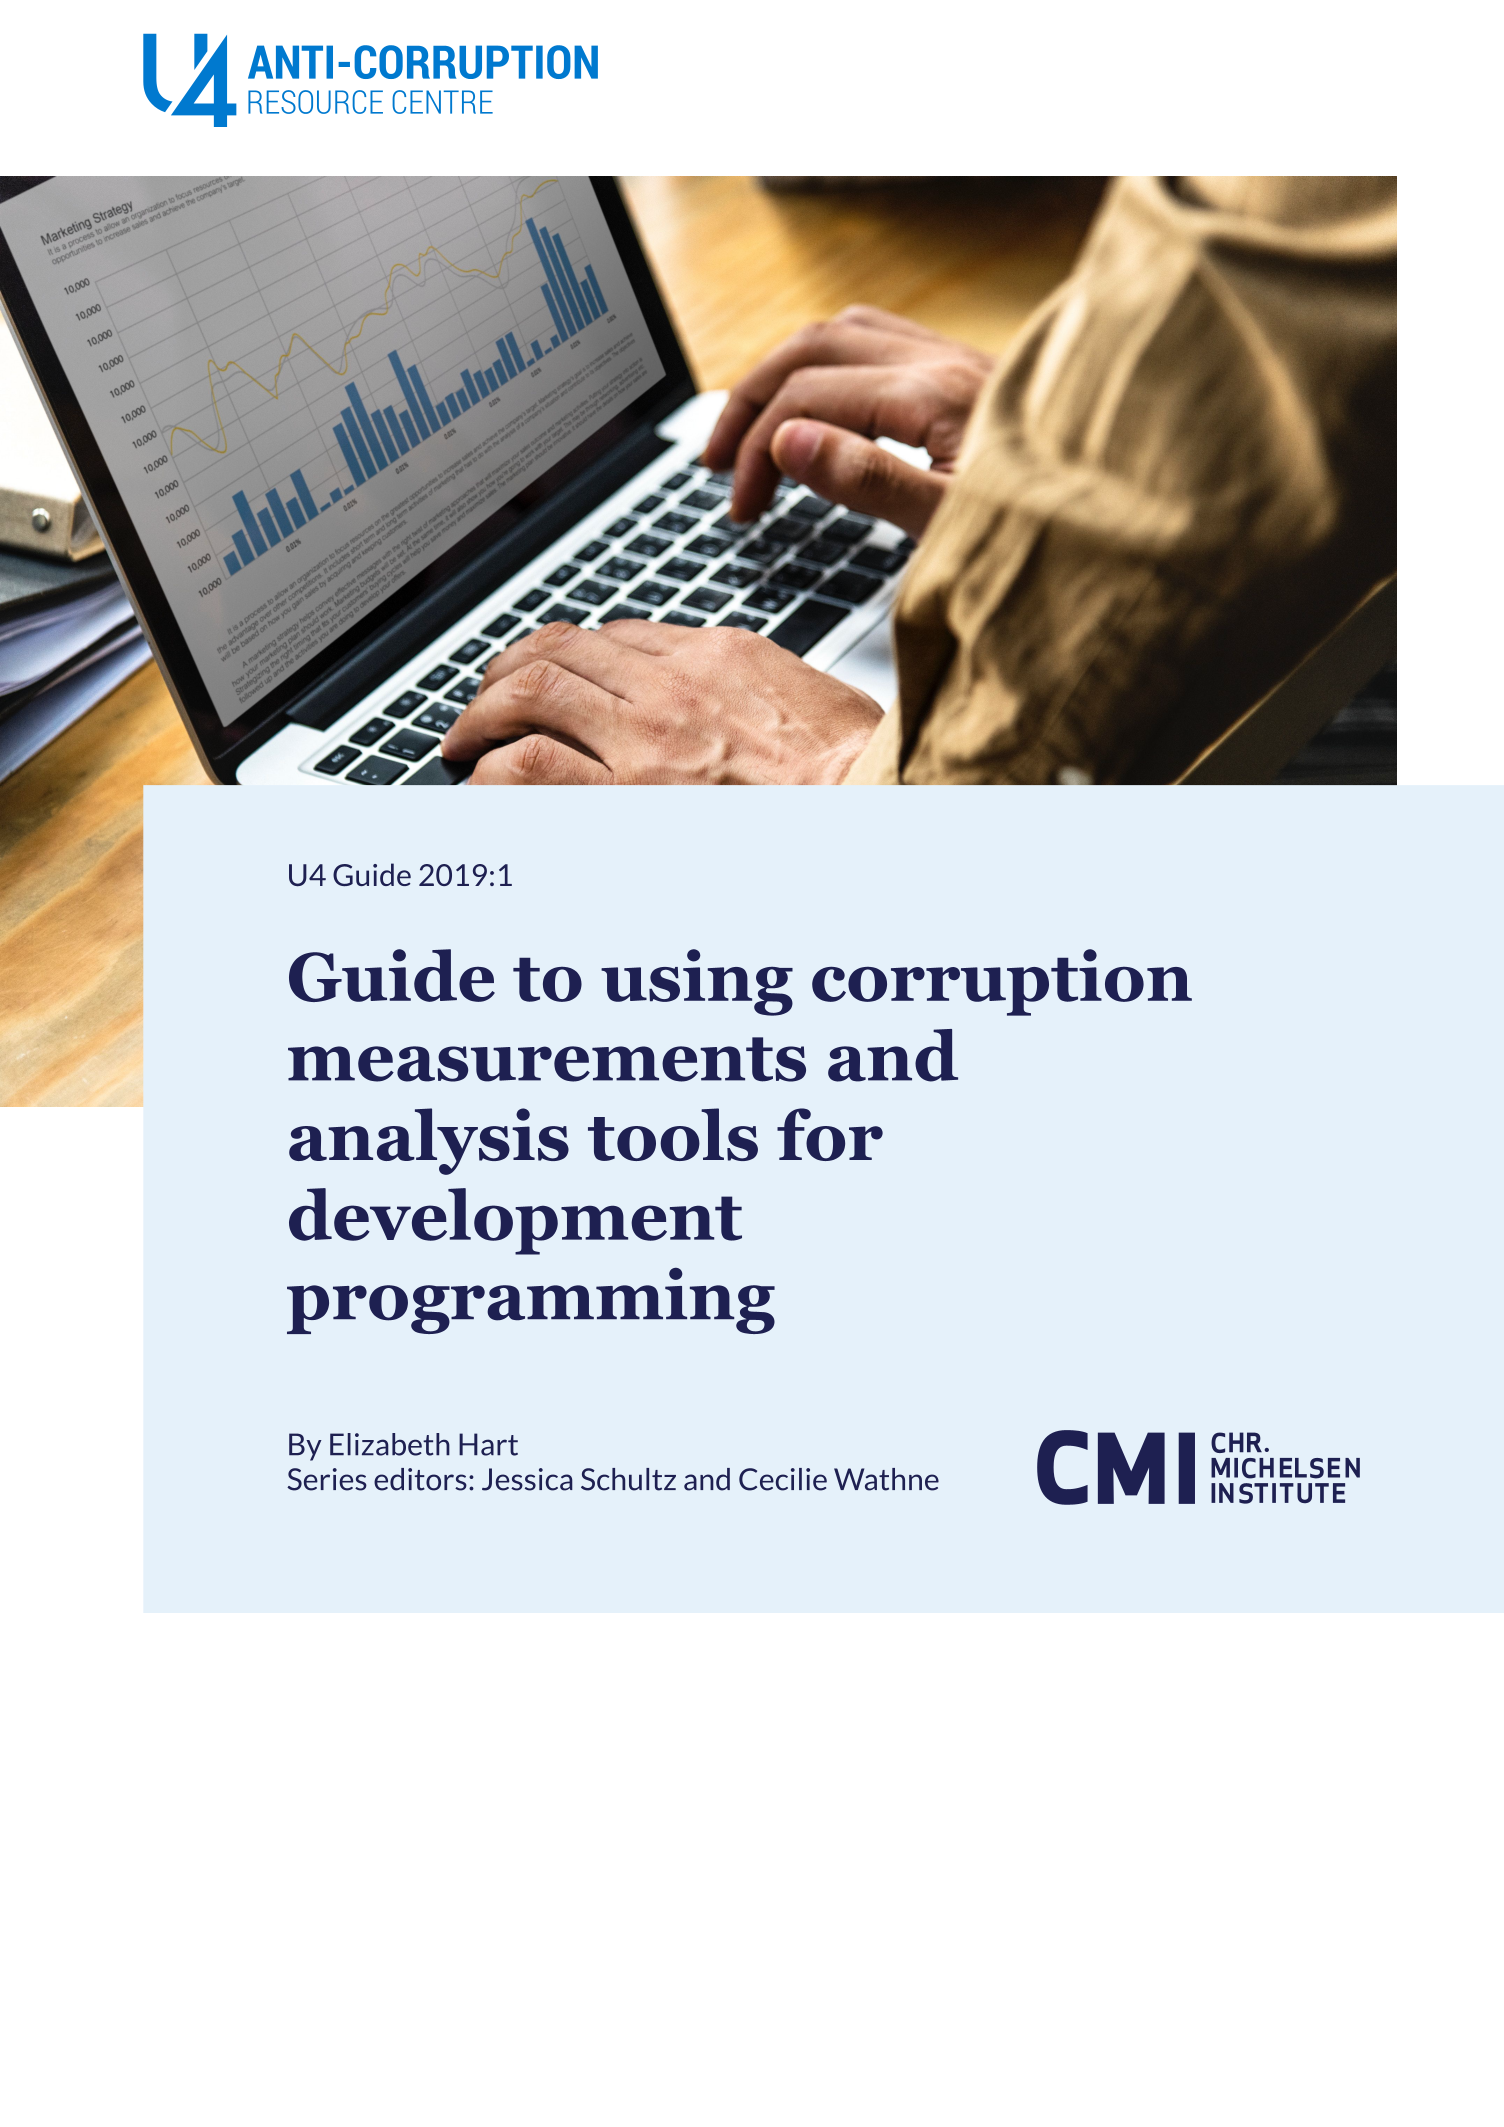 Guide to using corruption measurements and analysis tools for development programming